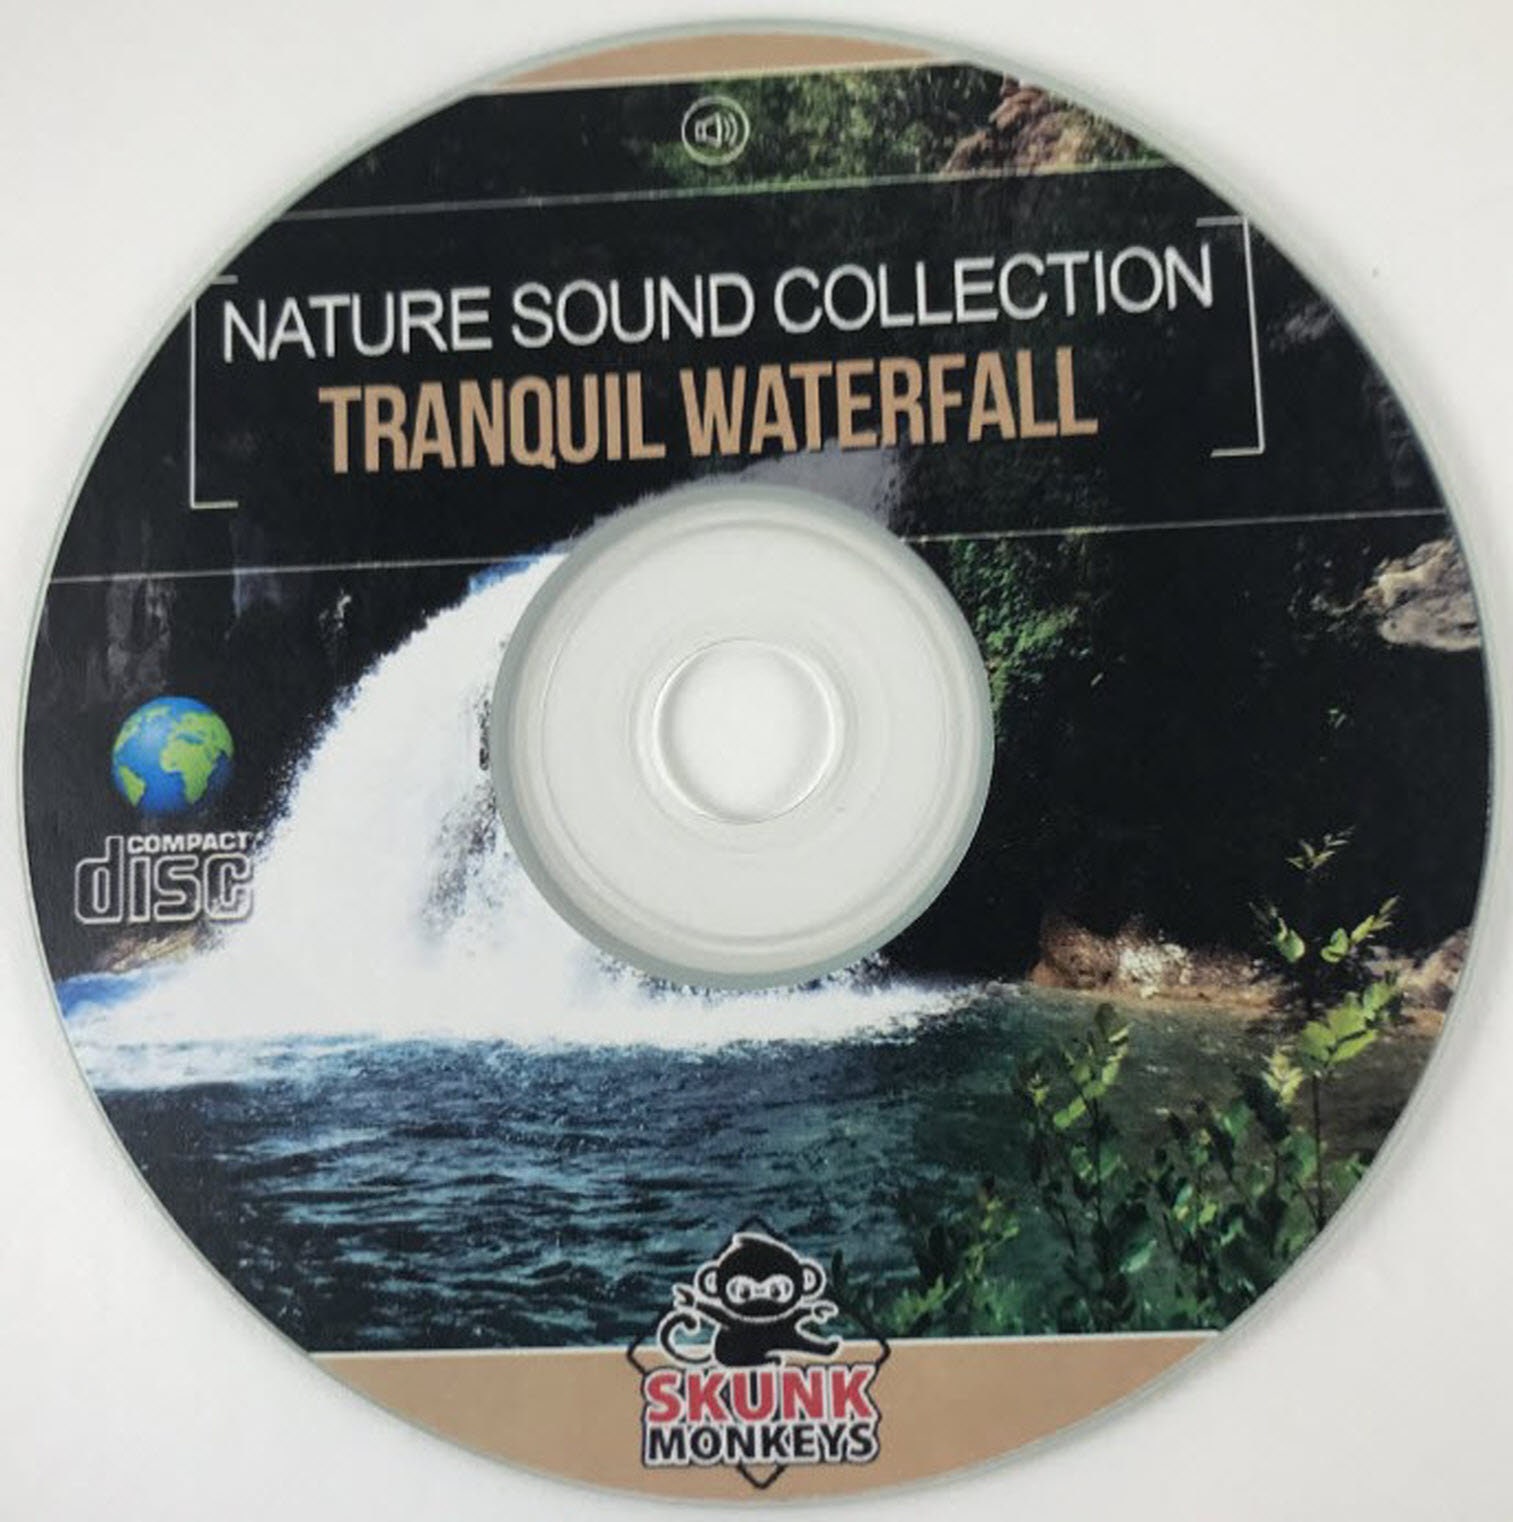 Audio Relax - Calming Giant Mountain WaterfallRelaxing Nature Sounds(10  hours)White noise for sleepingCalming Giant Mountain Waterfall Relaxing Nature Sounds(10 hours)White noise for sleepingGentle  Relaxing Giant